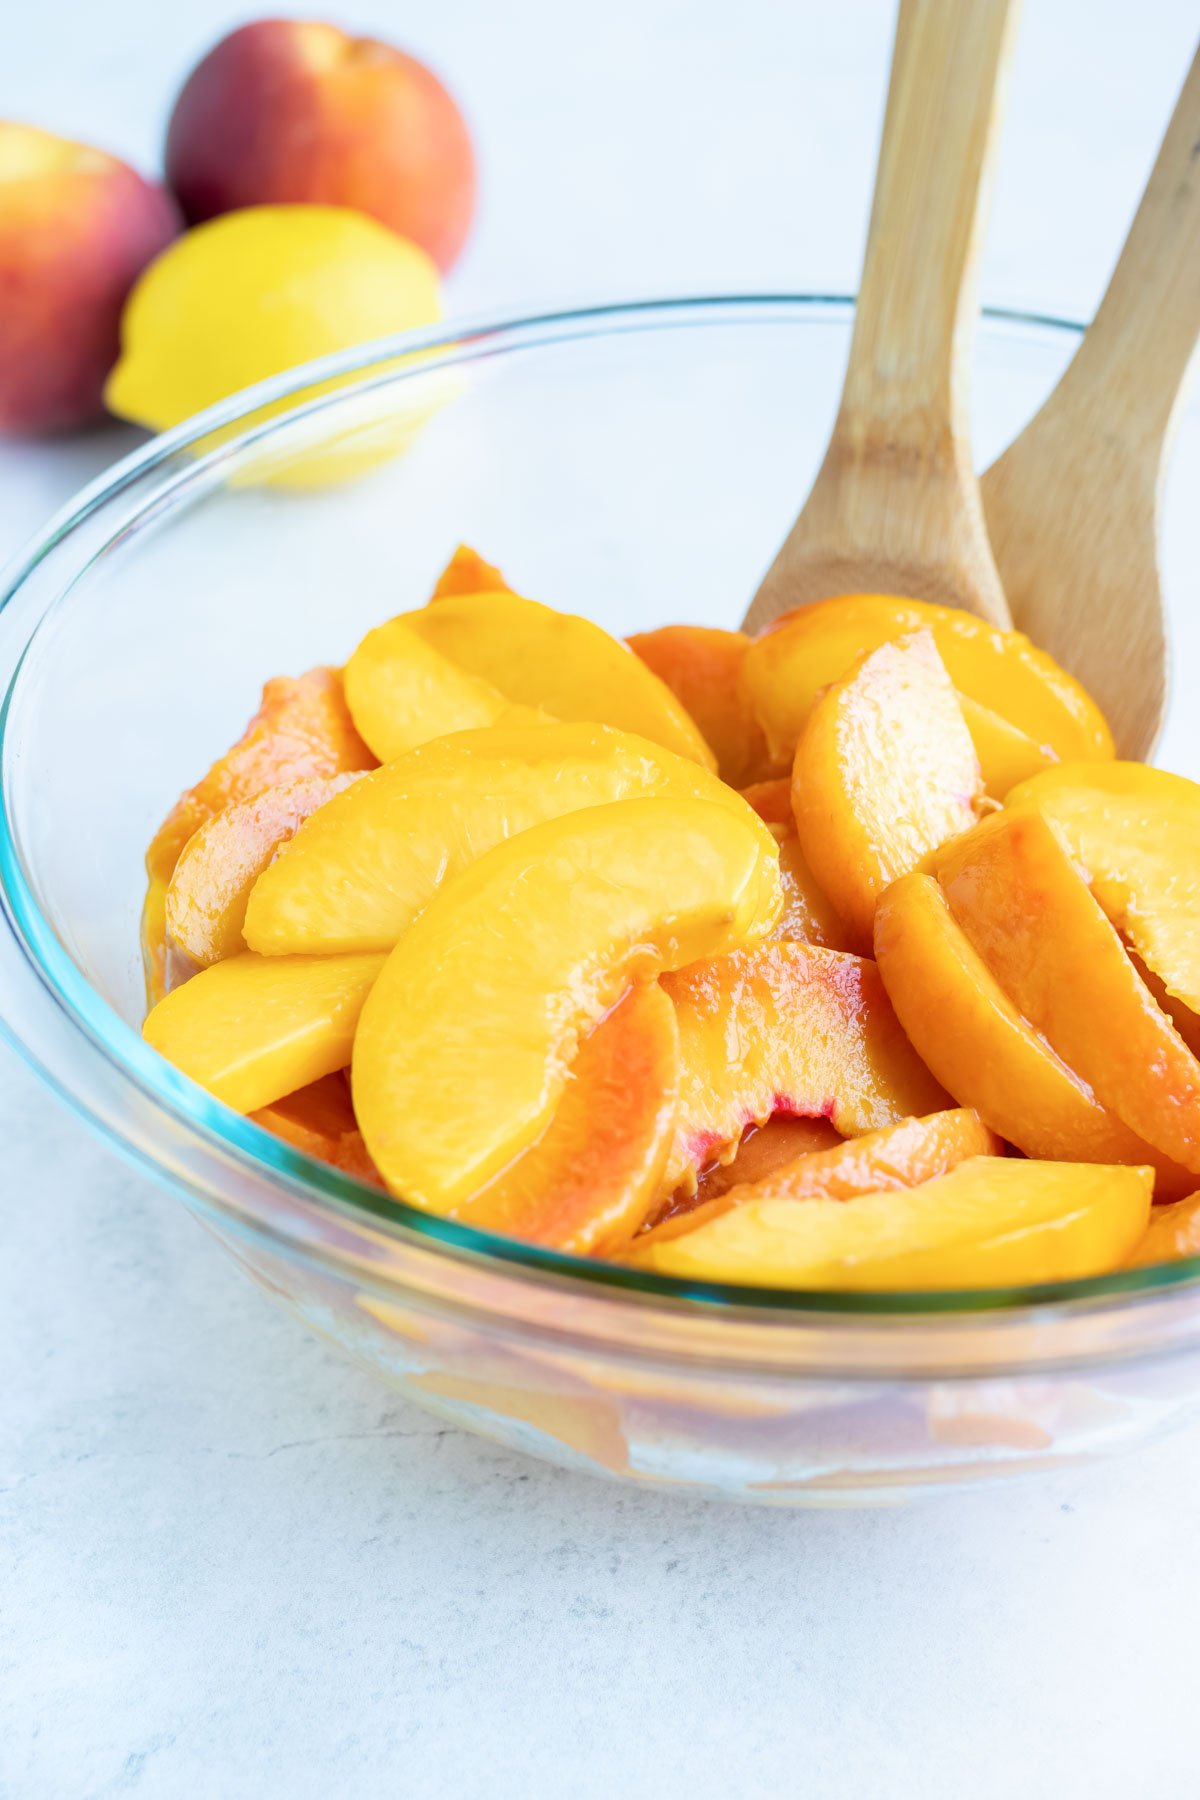 Sliced peaches are placed in a glass bowl as lemon juice is added to prevent browning.